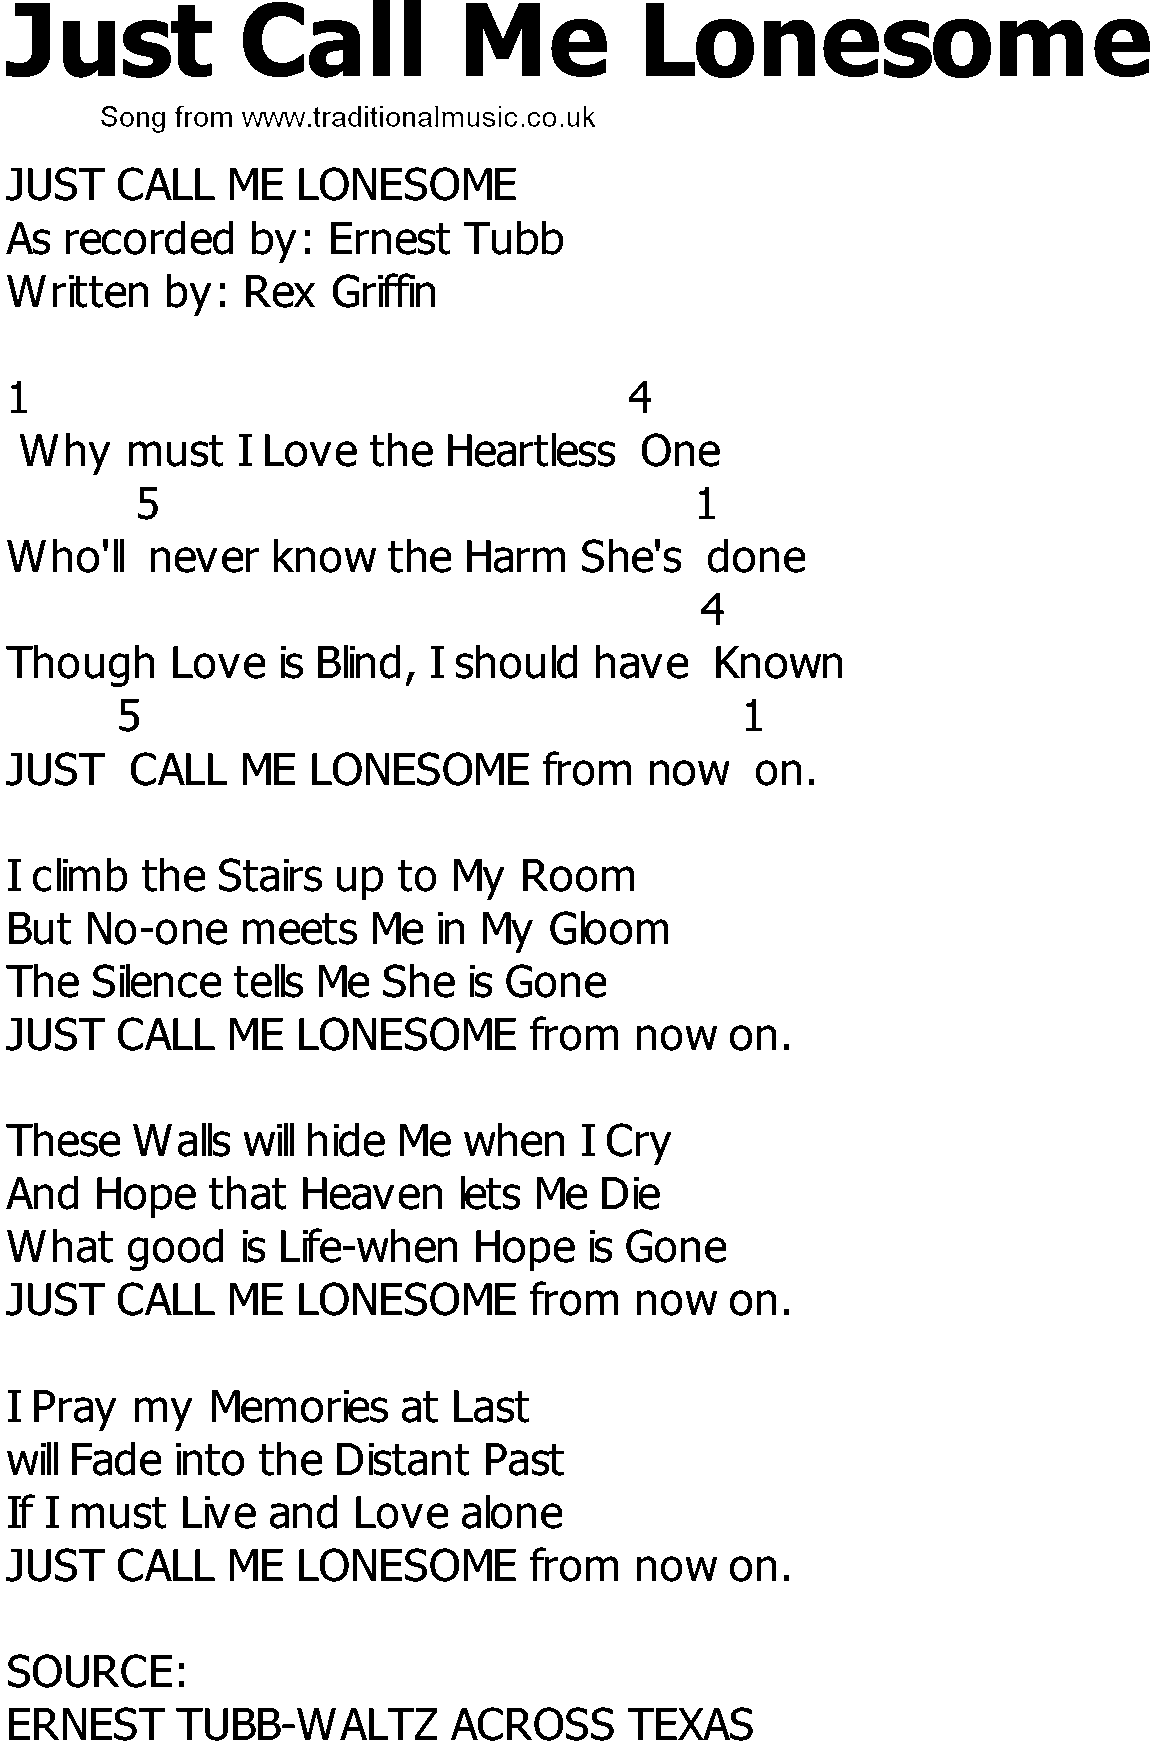 Old Country song lyrics with chords - Just Call Me Lonesome